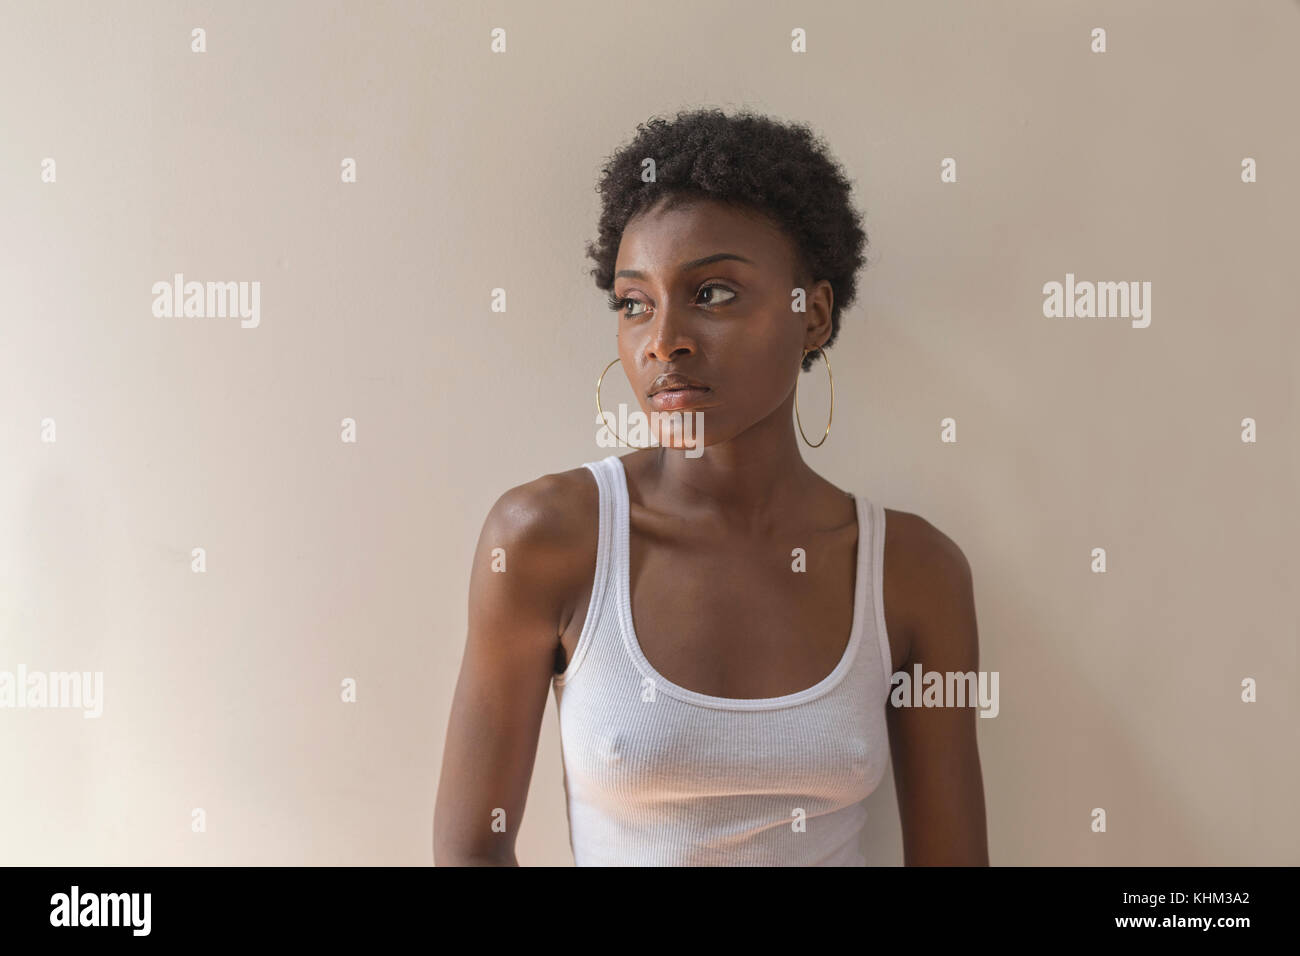 Portrait of a young woman with hoop earrings Stock Photo